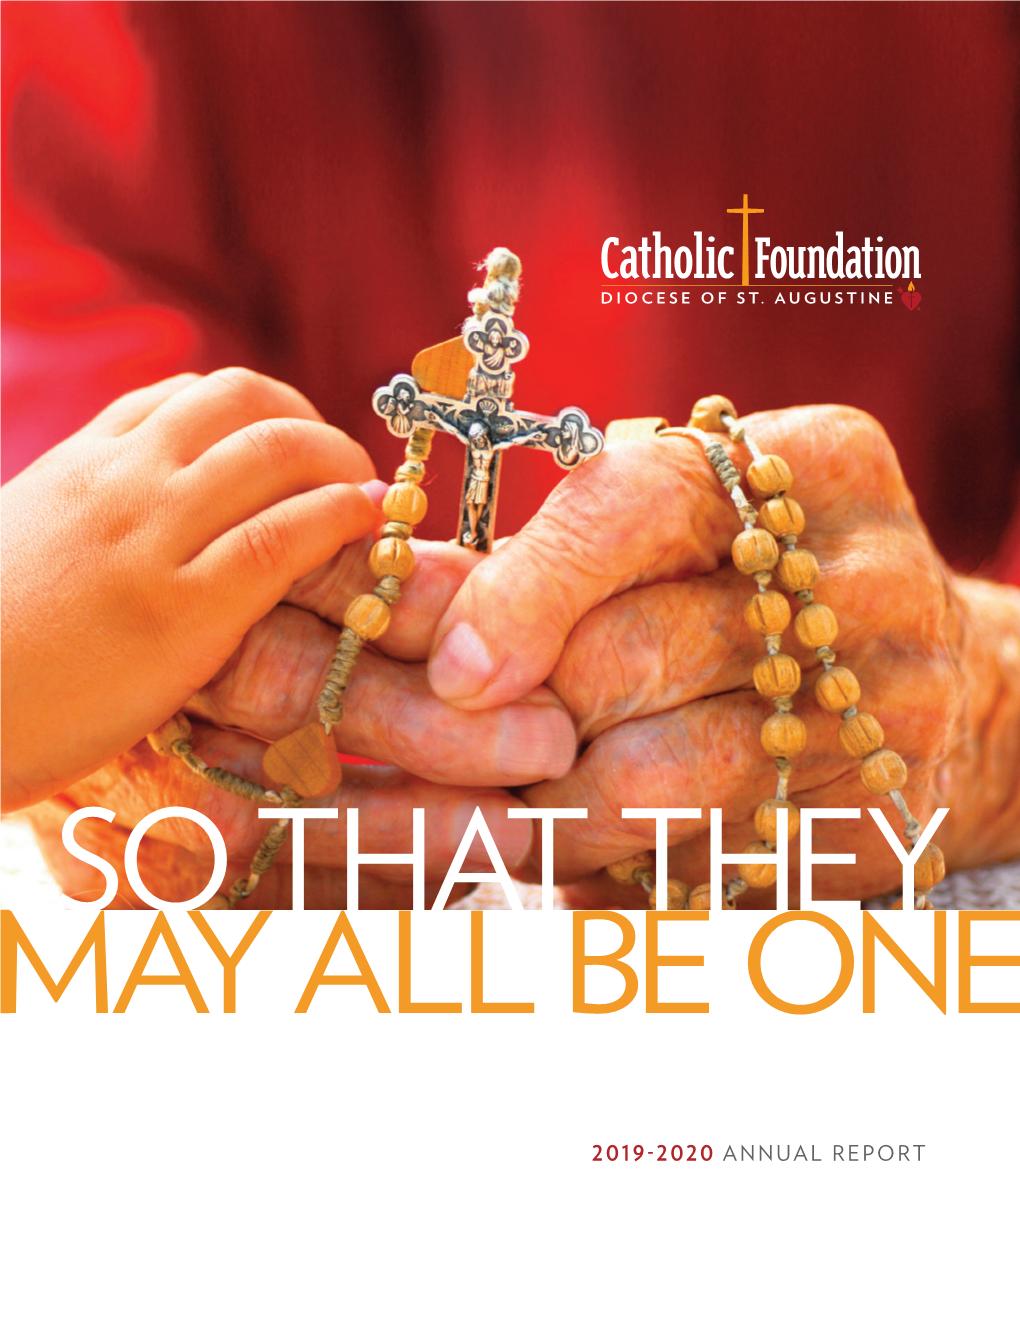 2019-2020 Annual Report Co Nn Ectin G Catholics Table of Contents 2020 Impact Grants 11